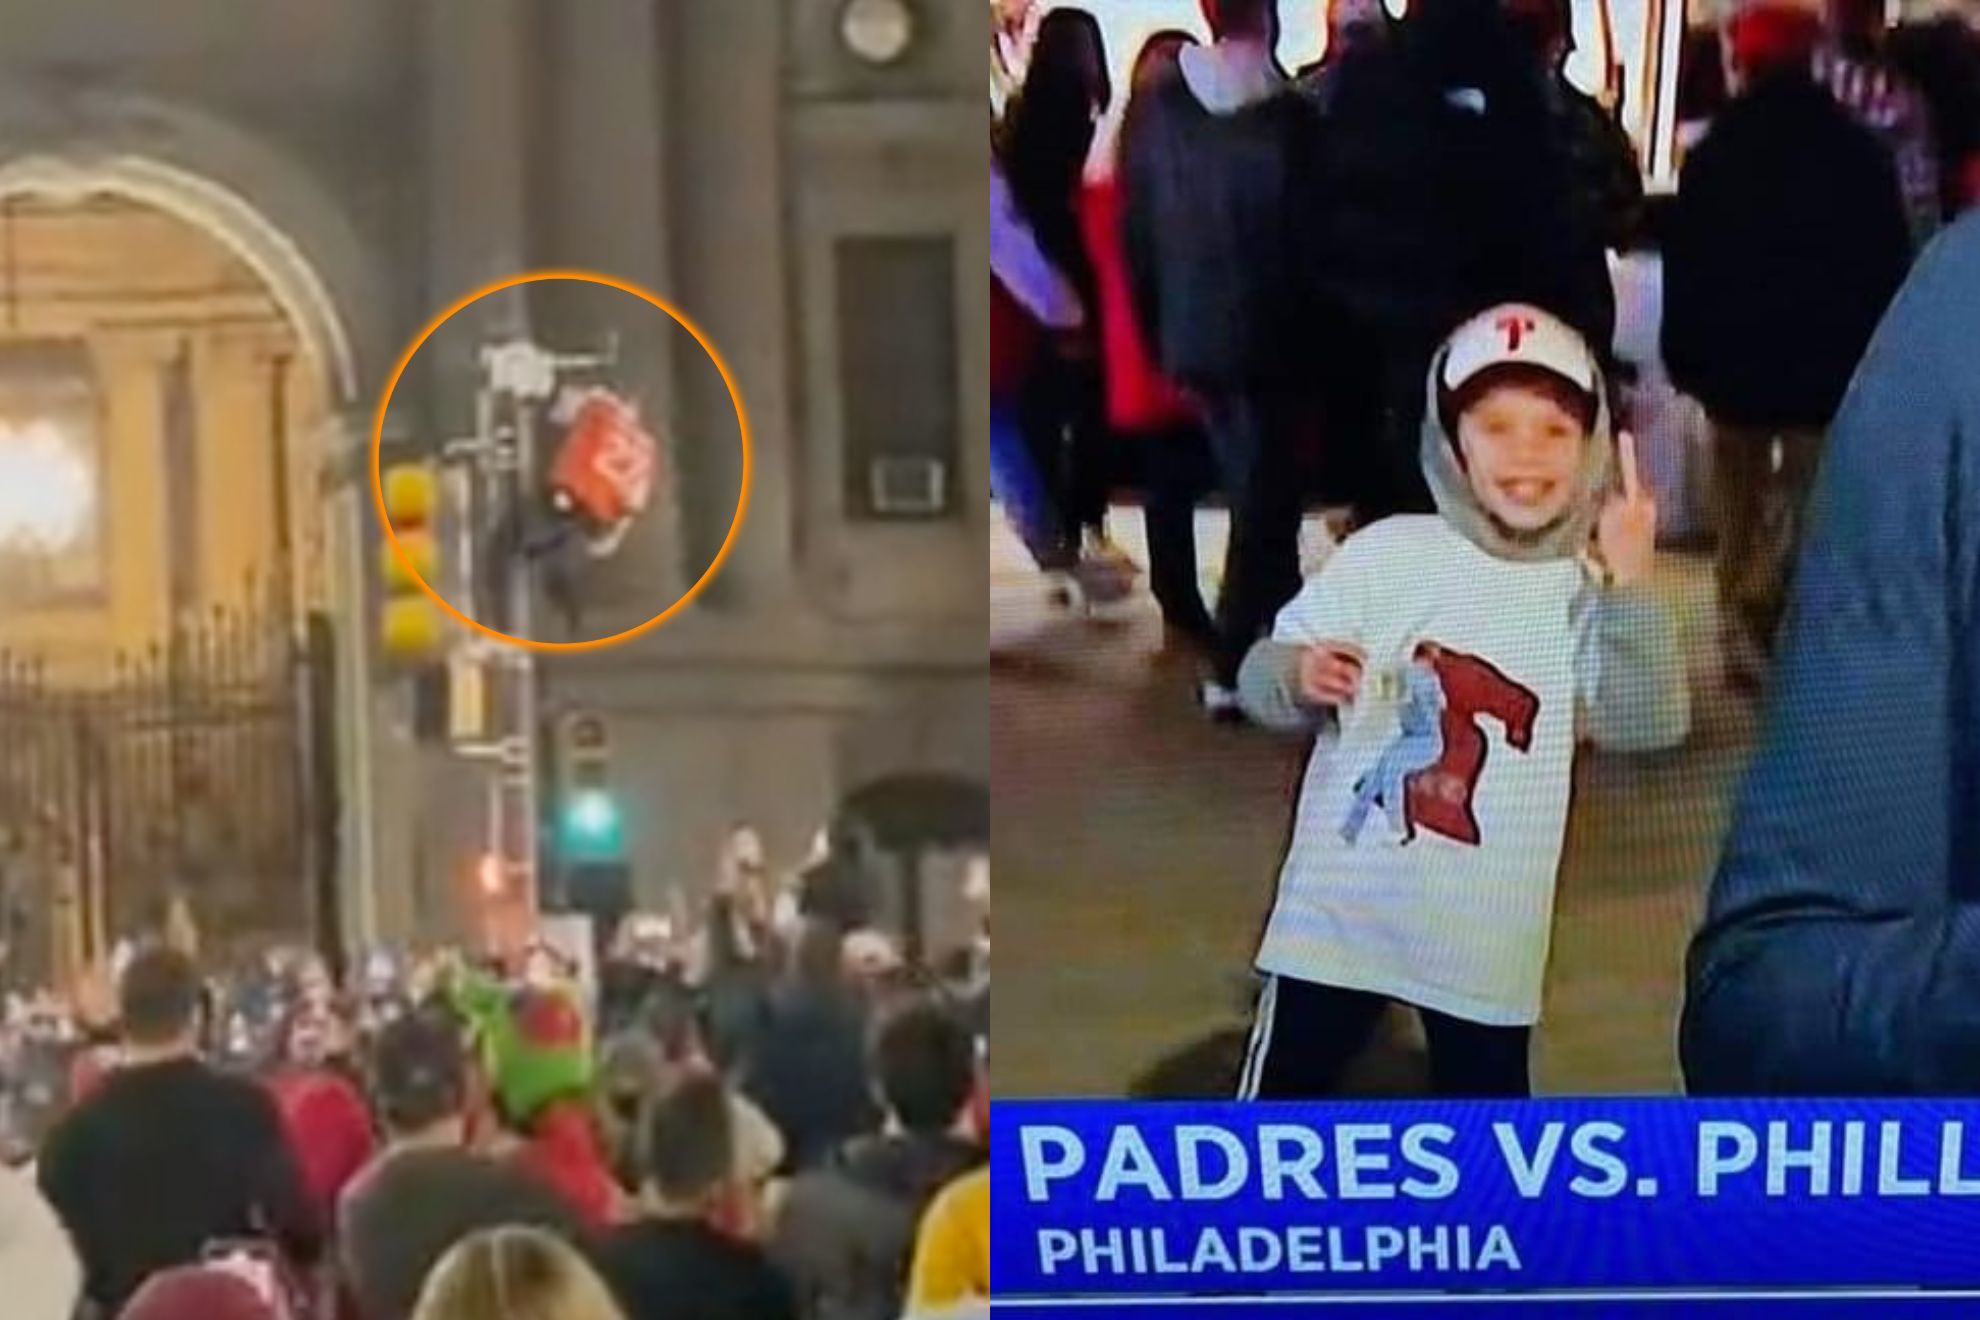 Phillies fans celebrate in the street after bringing home their first MLB pennant since 2009.